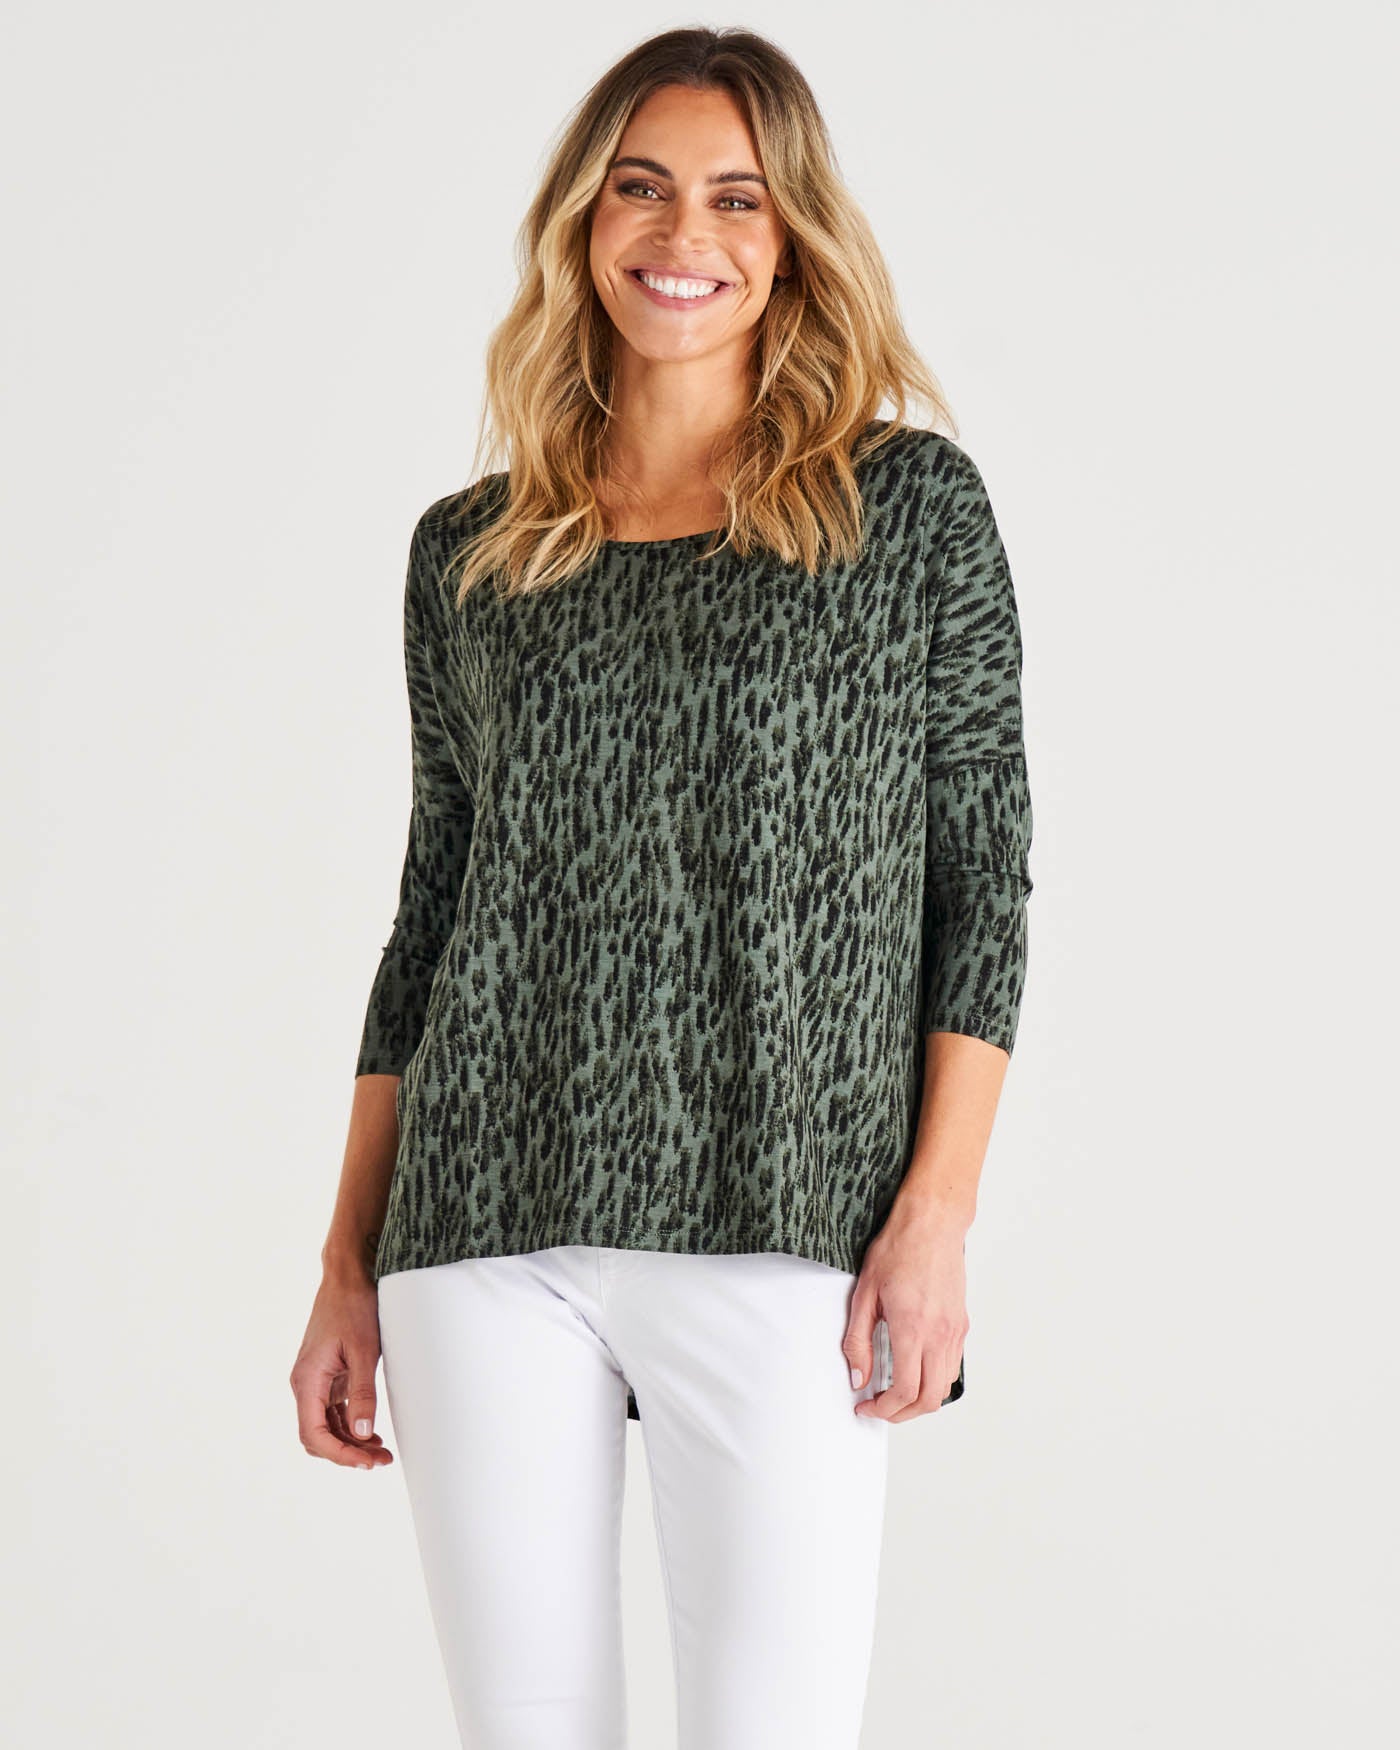 Milan Stretchy Draped Relaxed 3/4 Sleeve  Basic Top - Abstract Green Print